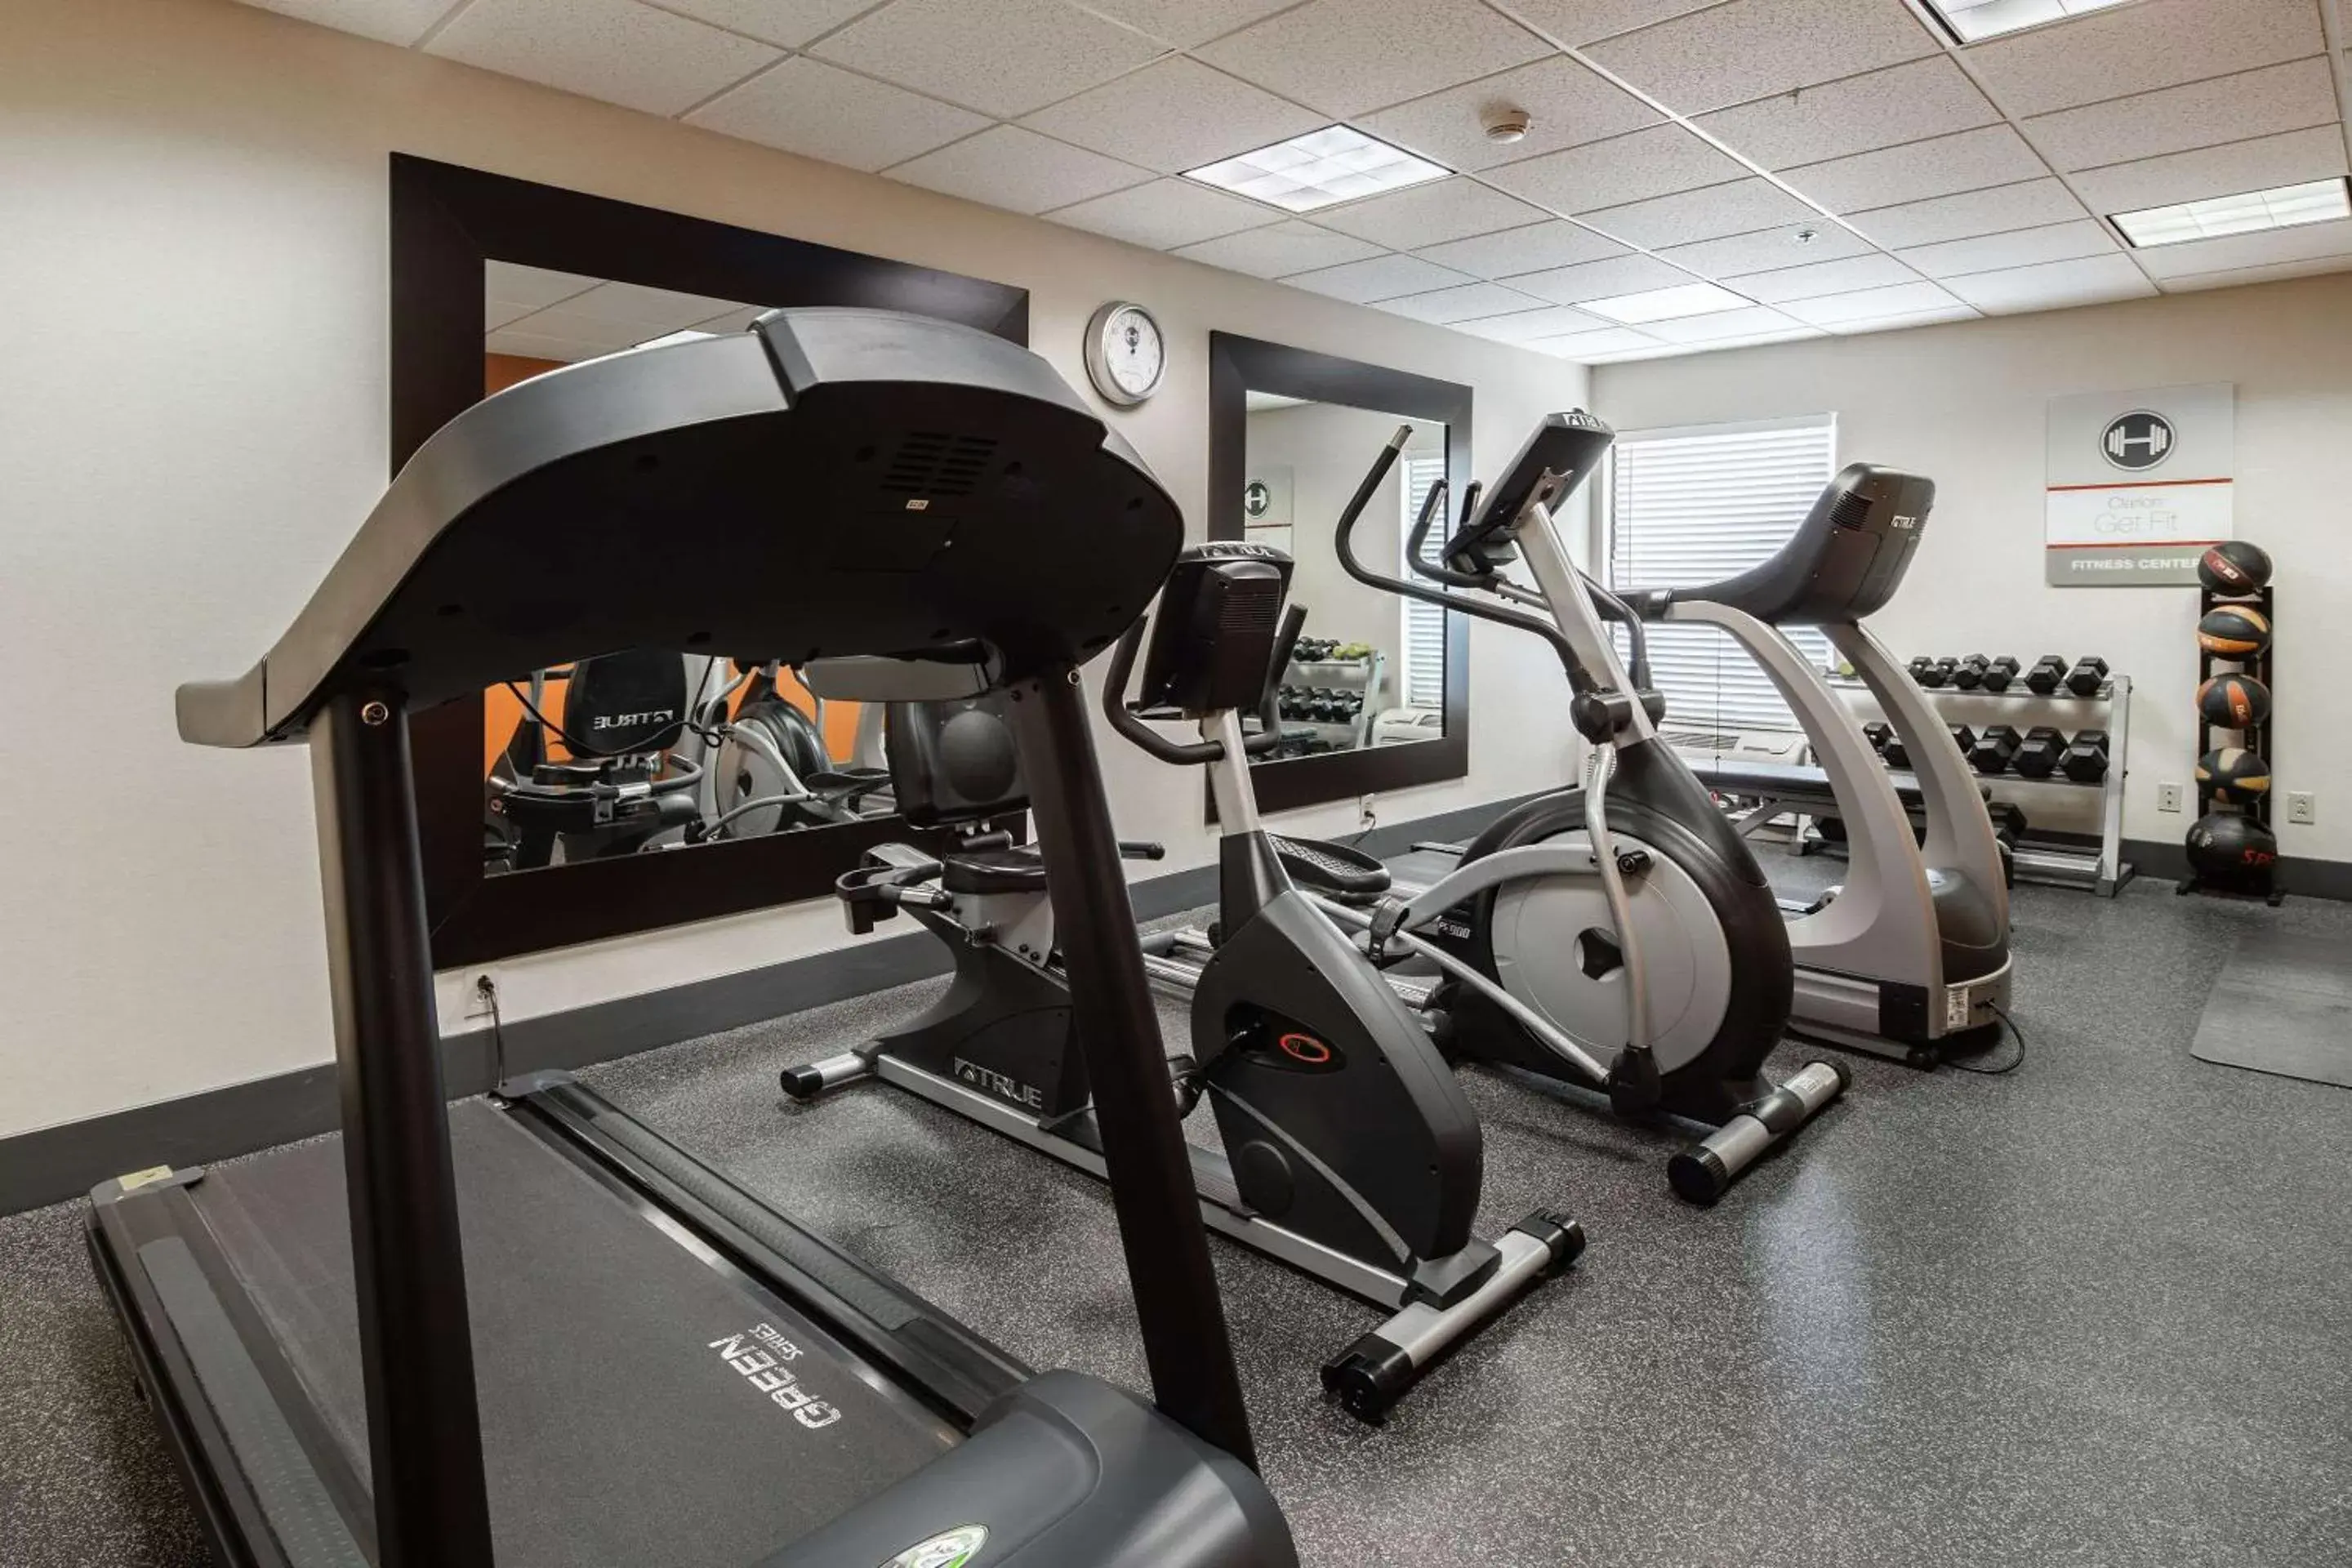 Fitness centre/facilities, Fitness Center/Facilities in Clarion Inn near Lookout Mountain